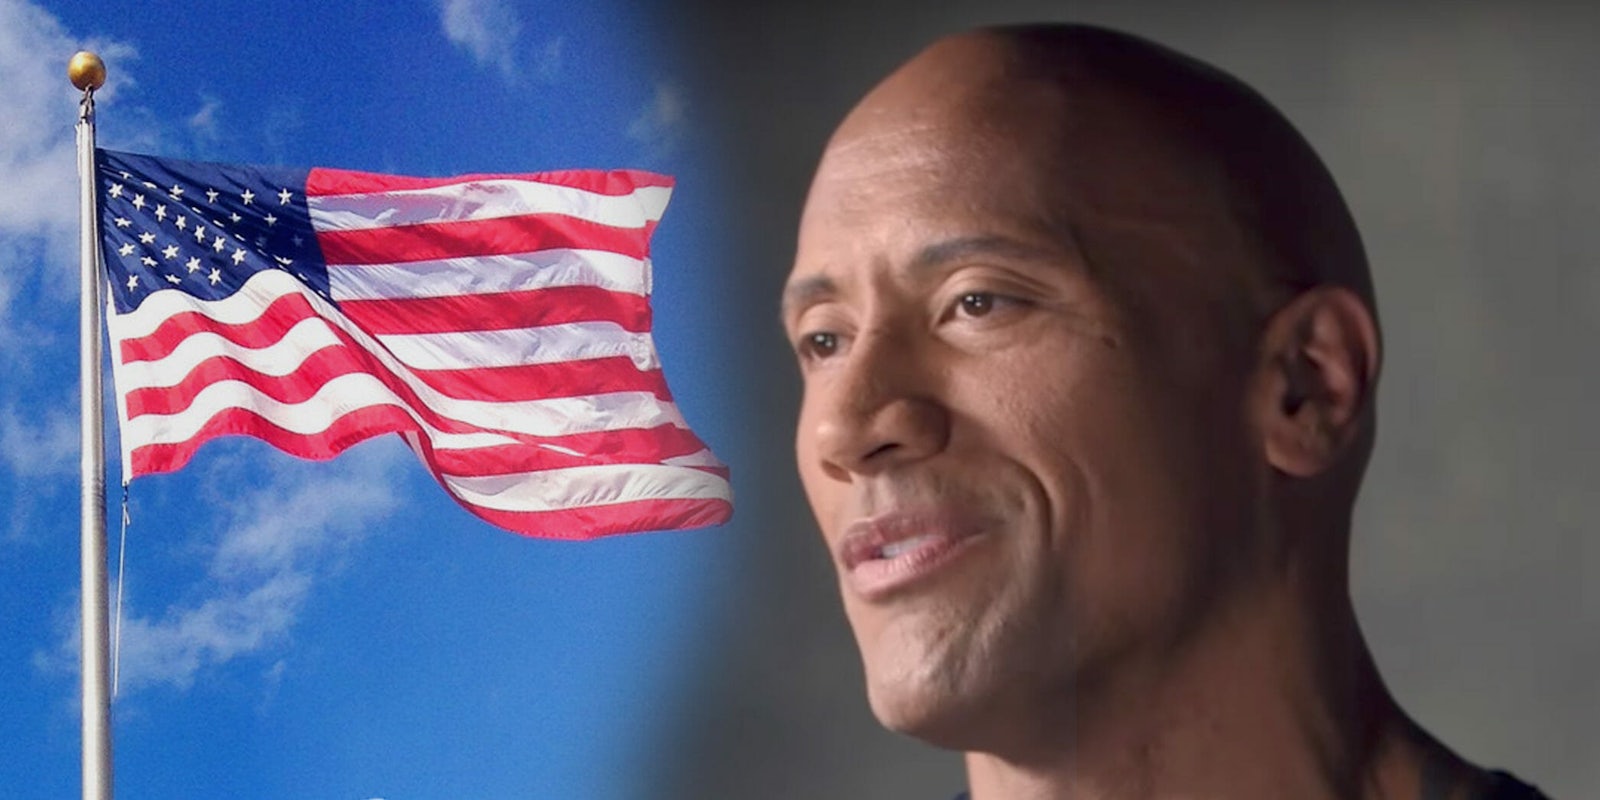 The Rock may run for president, but what are his political views?